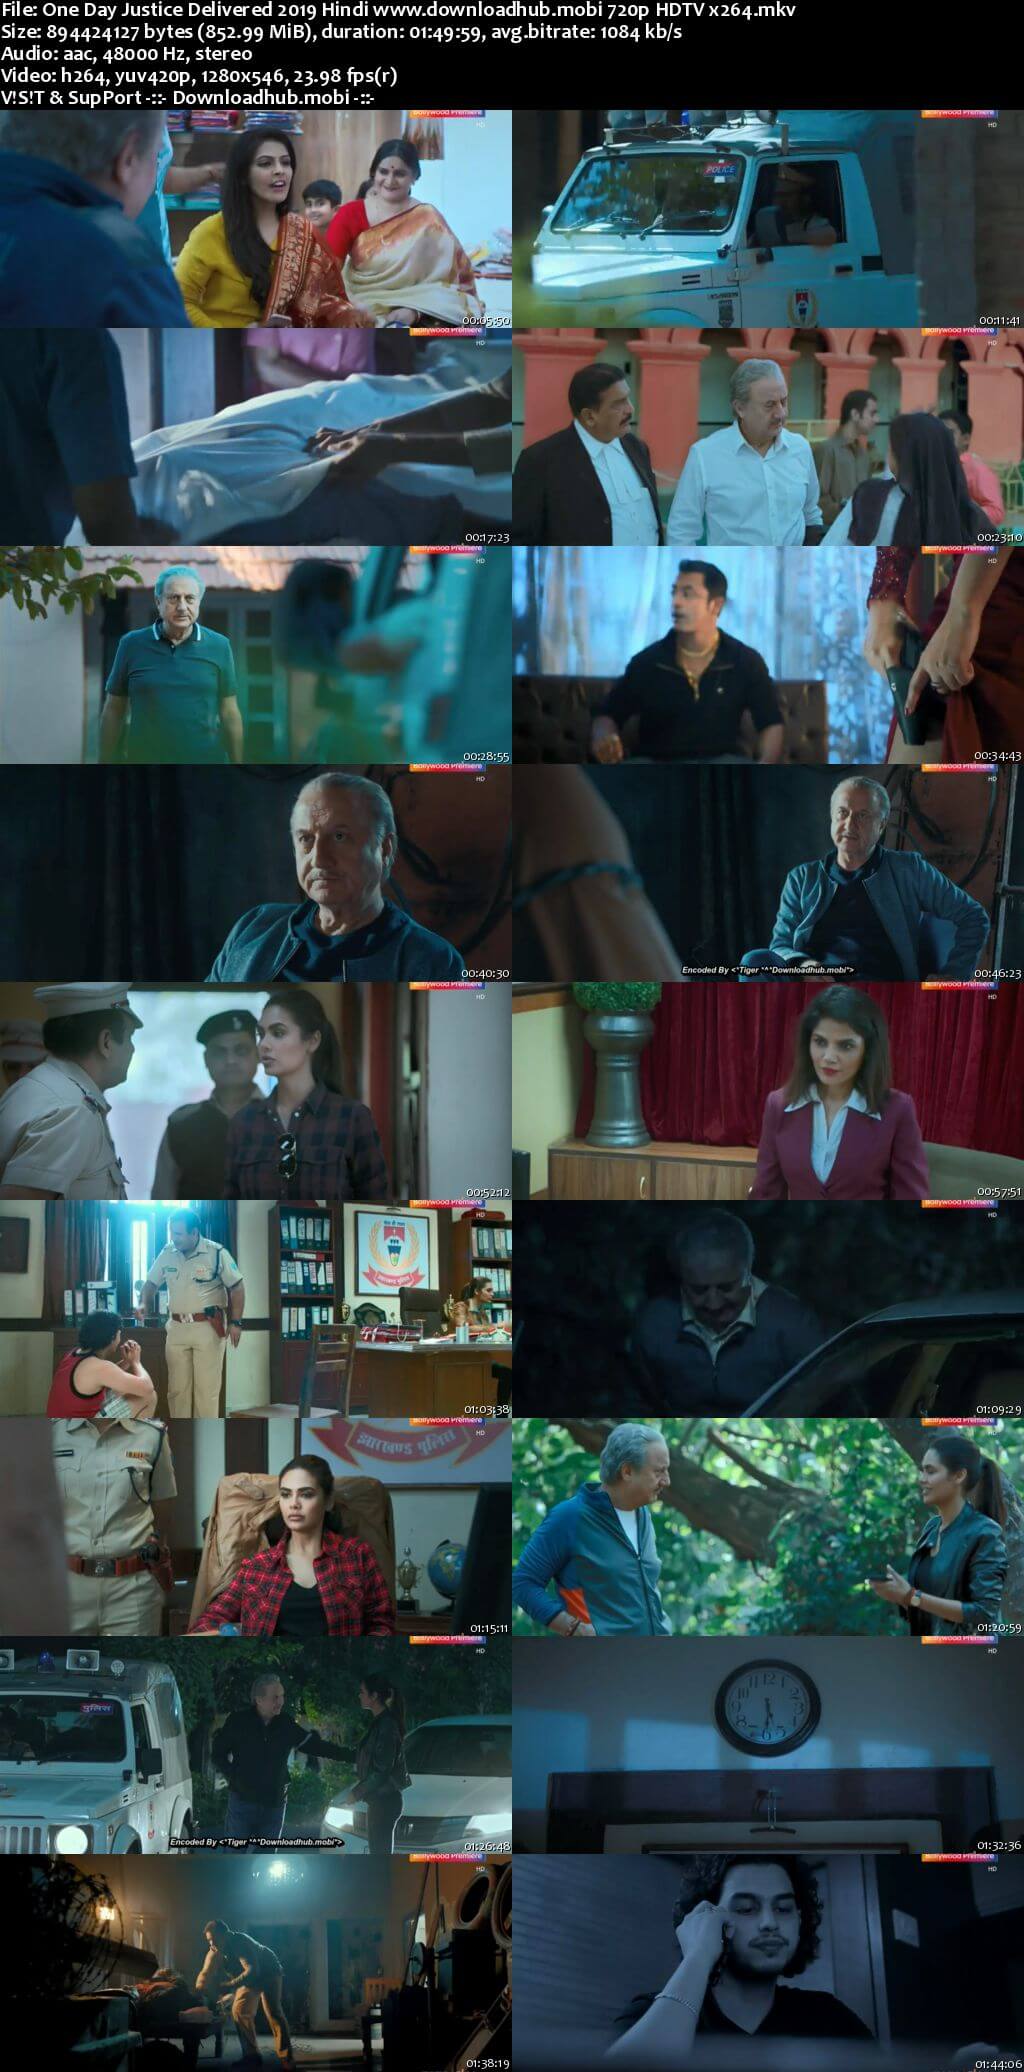 One Day Justice Delivered 2019 Hindi 720p HDTV x264